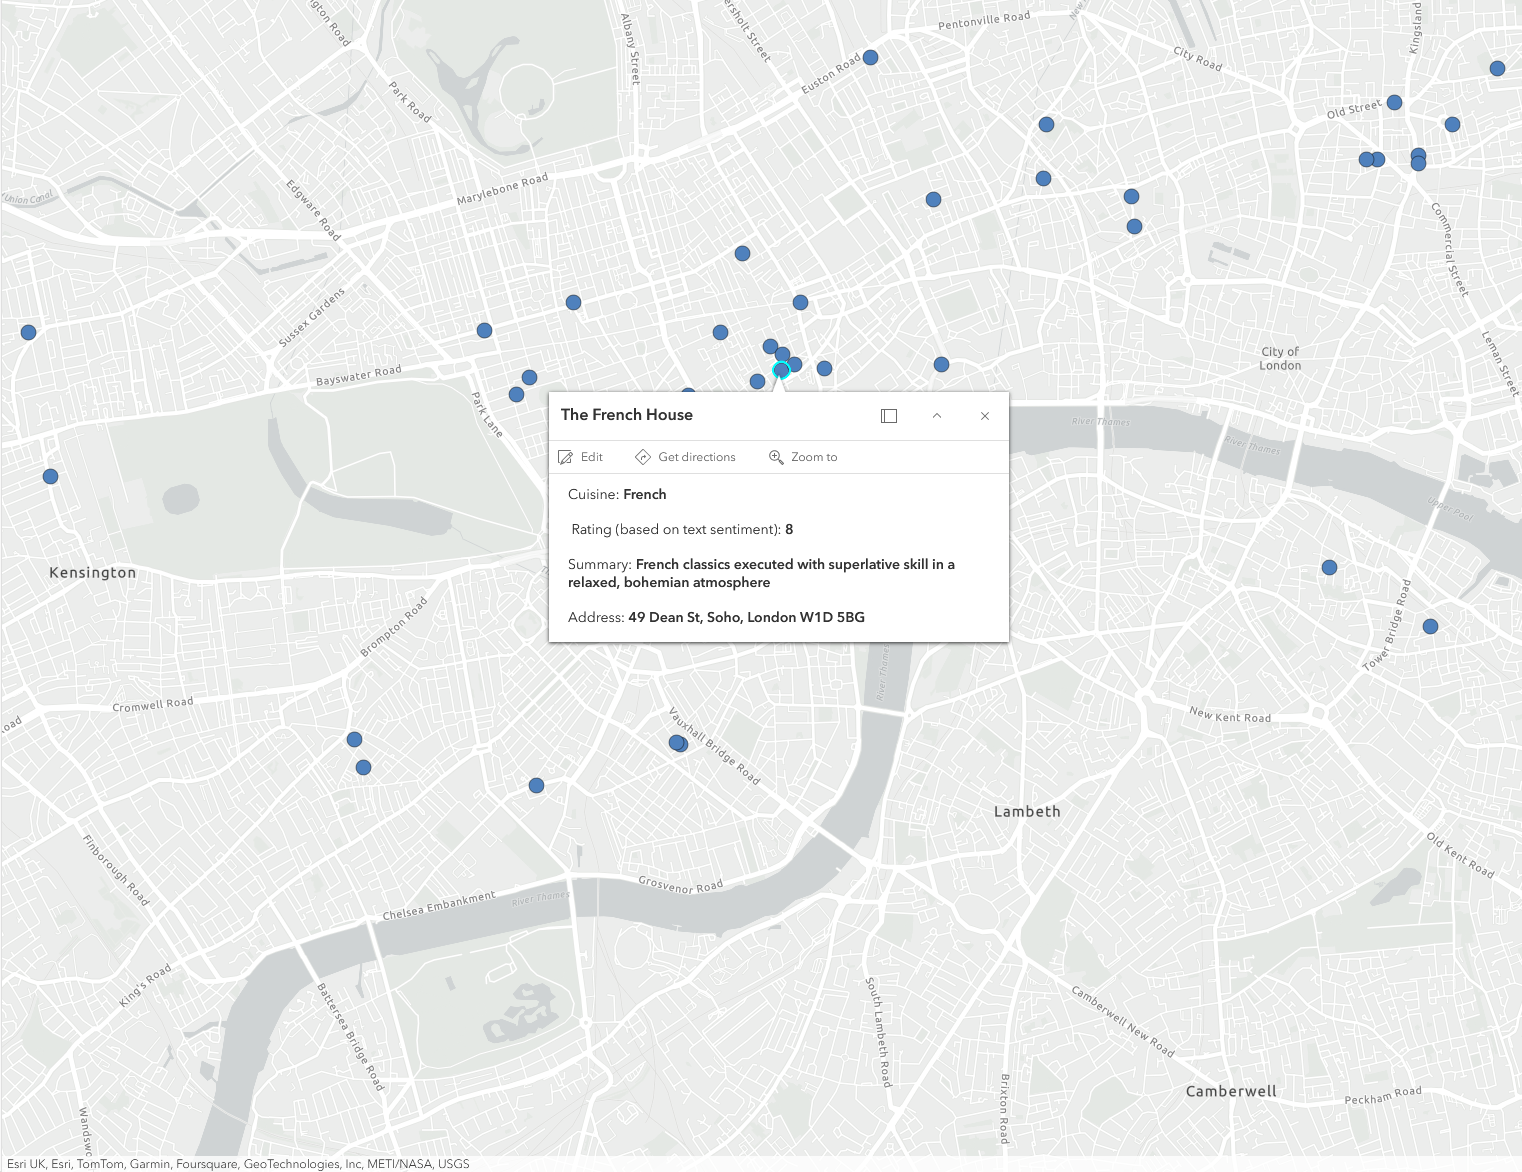 Map of restaurants created by loading the table into ArcGIS Online.